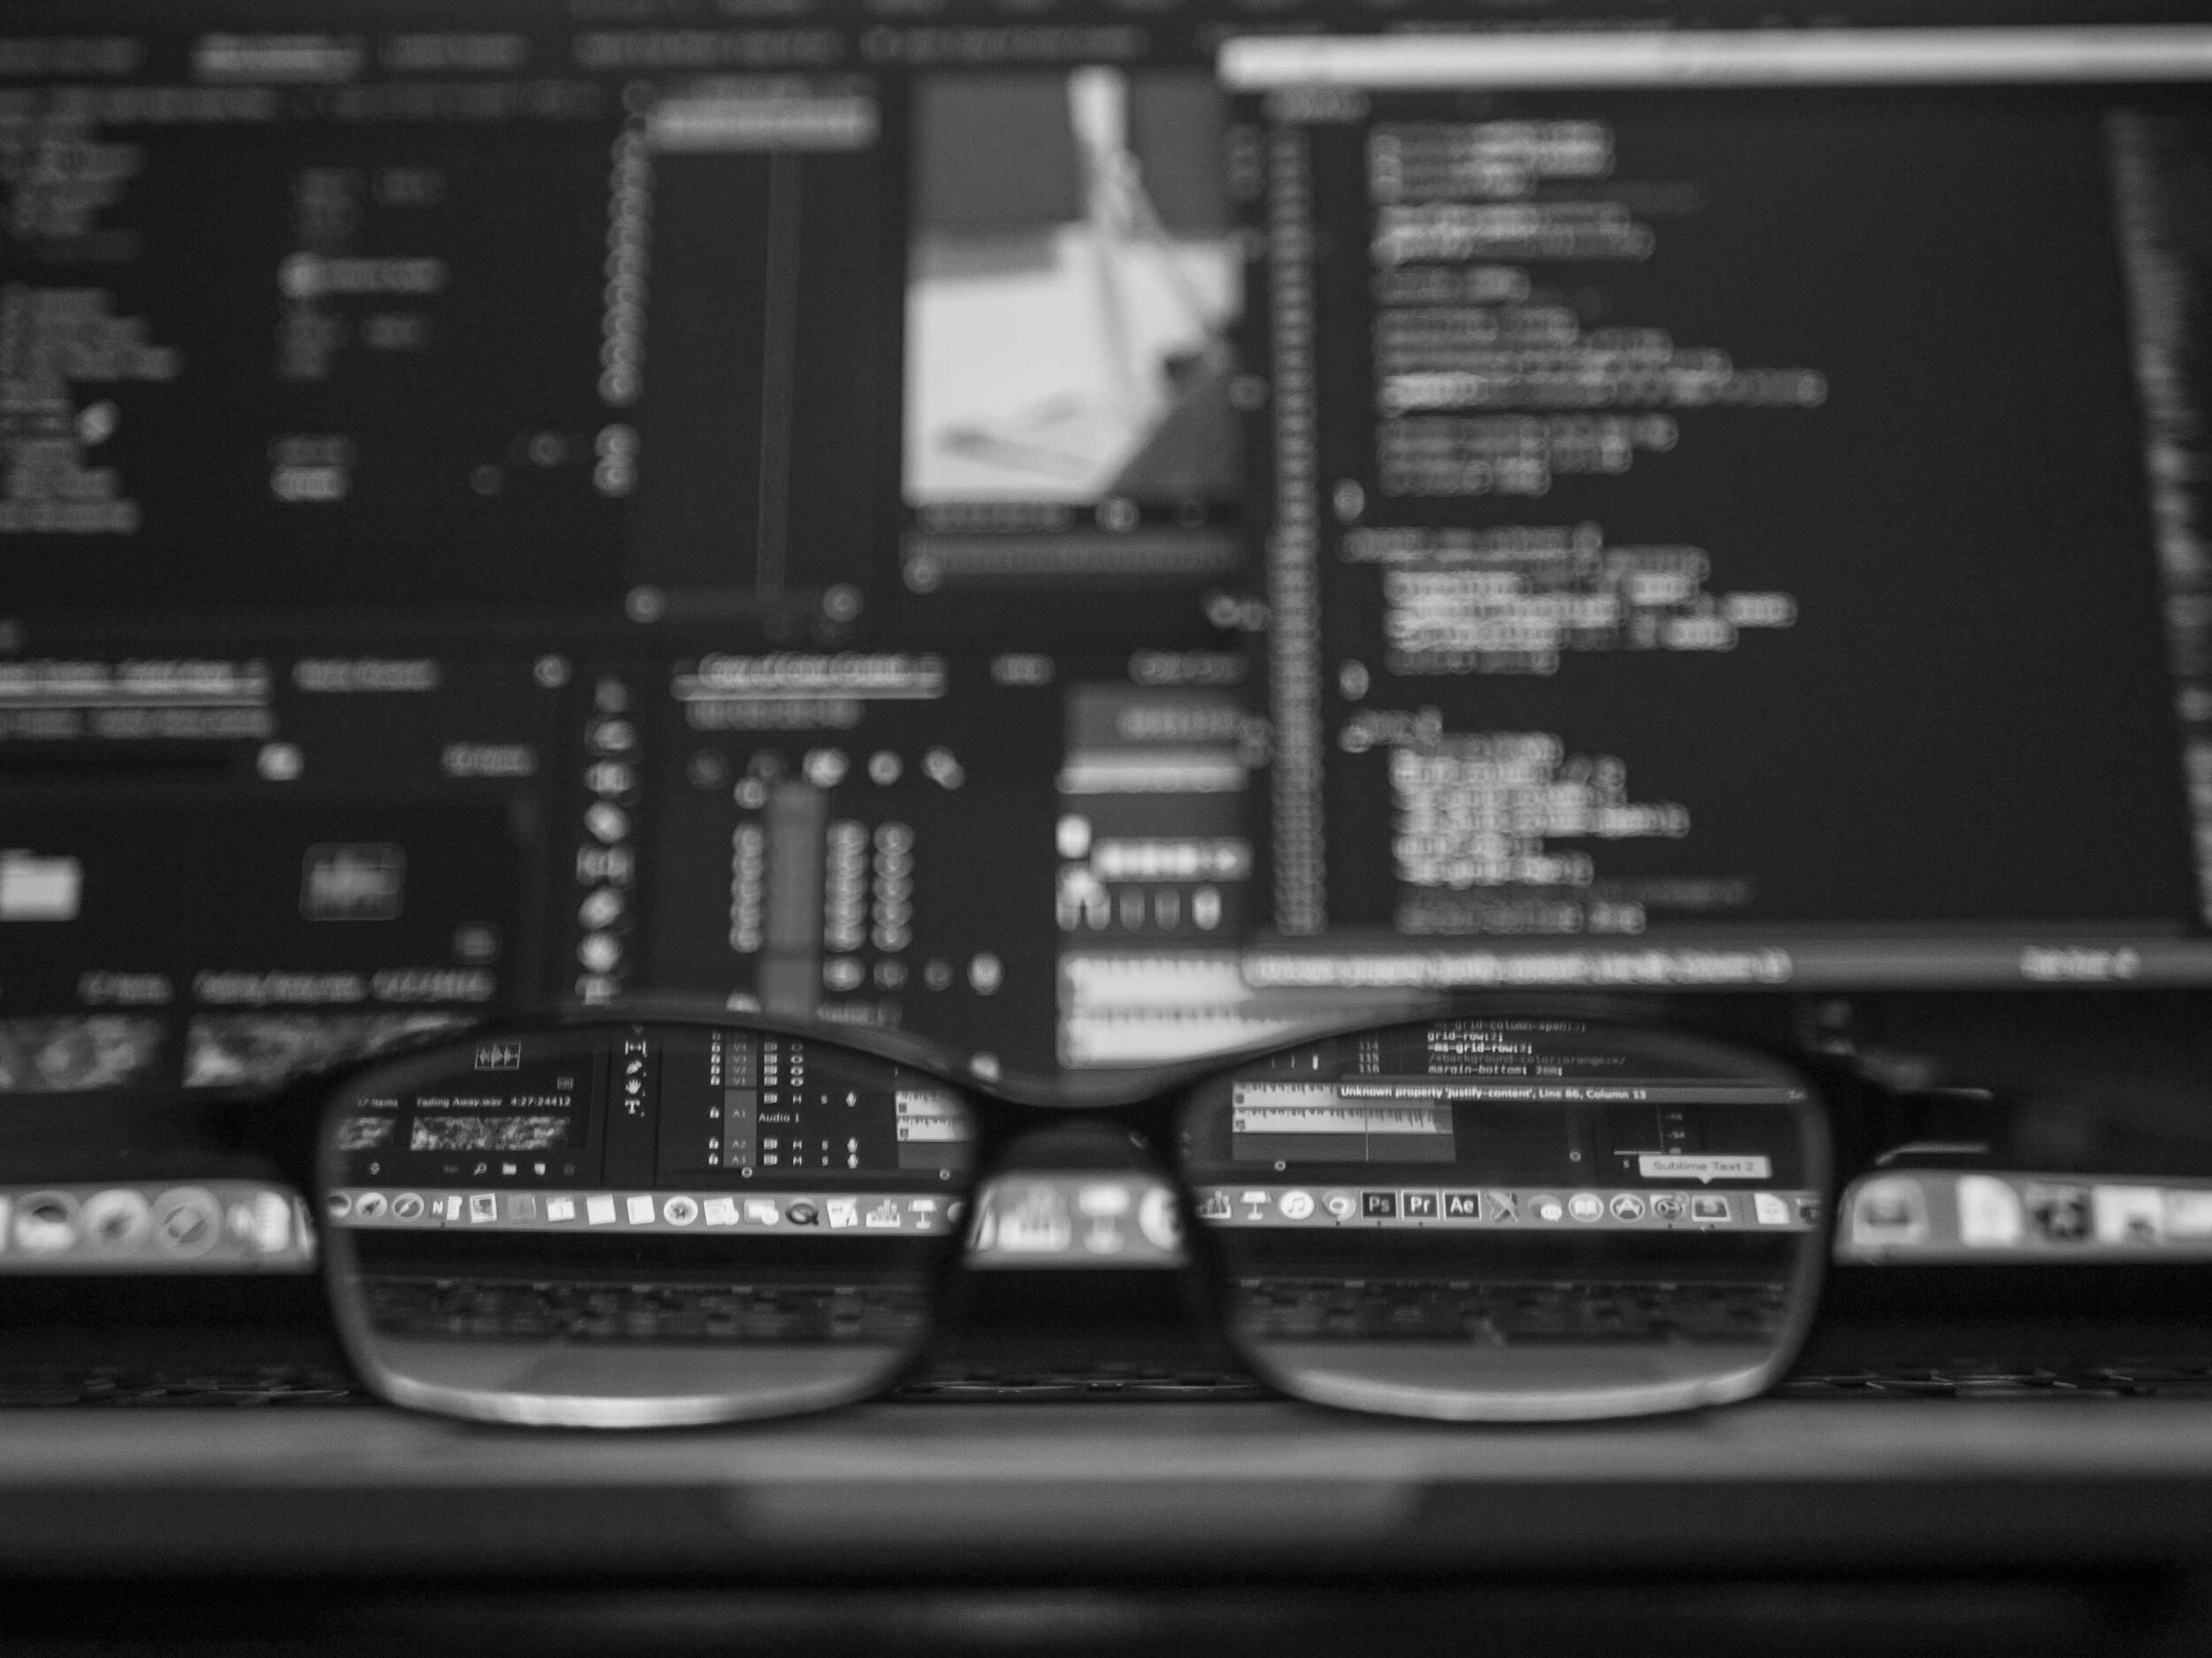 Glasses in front of computers